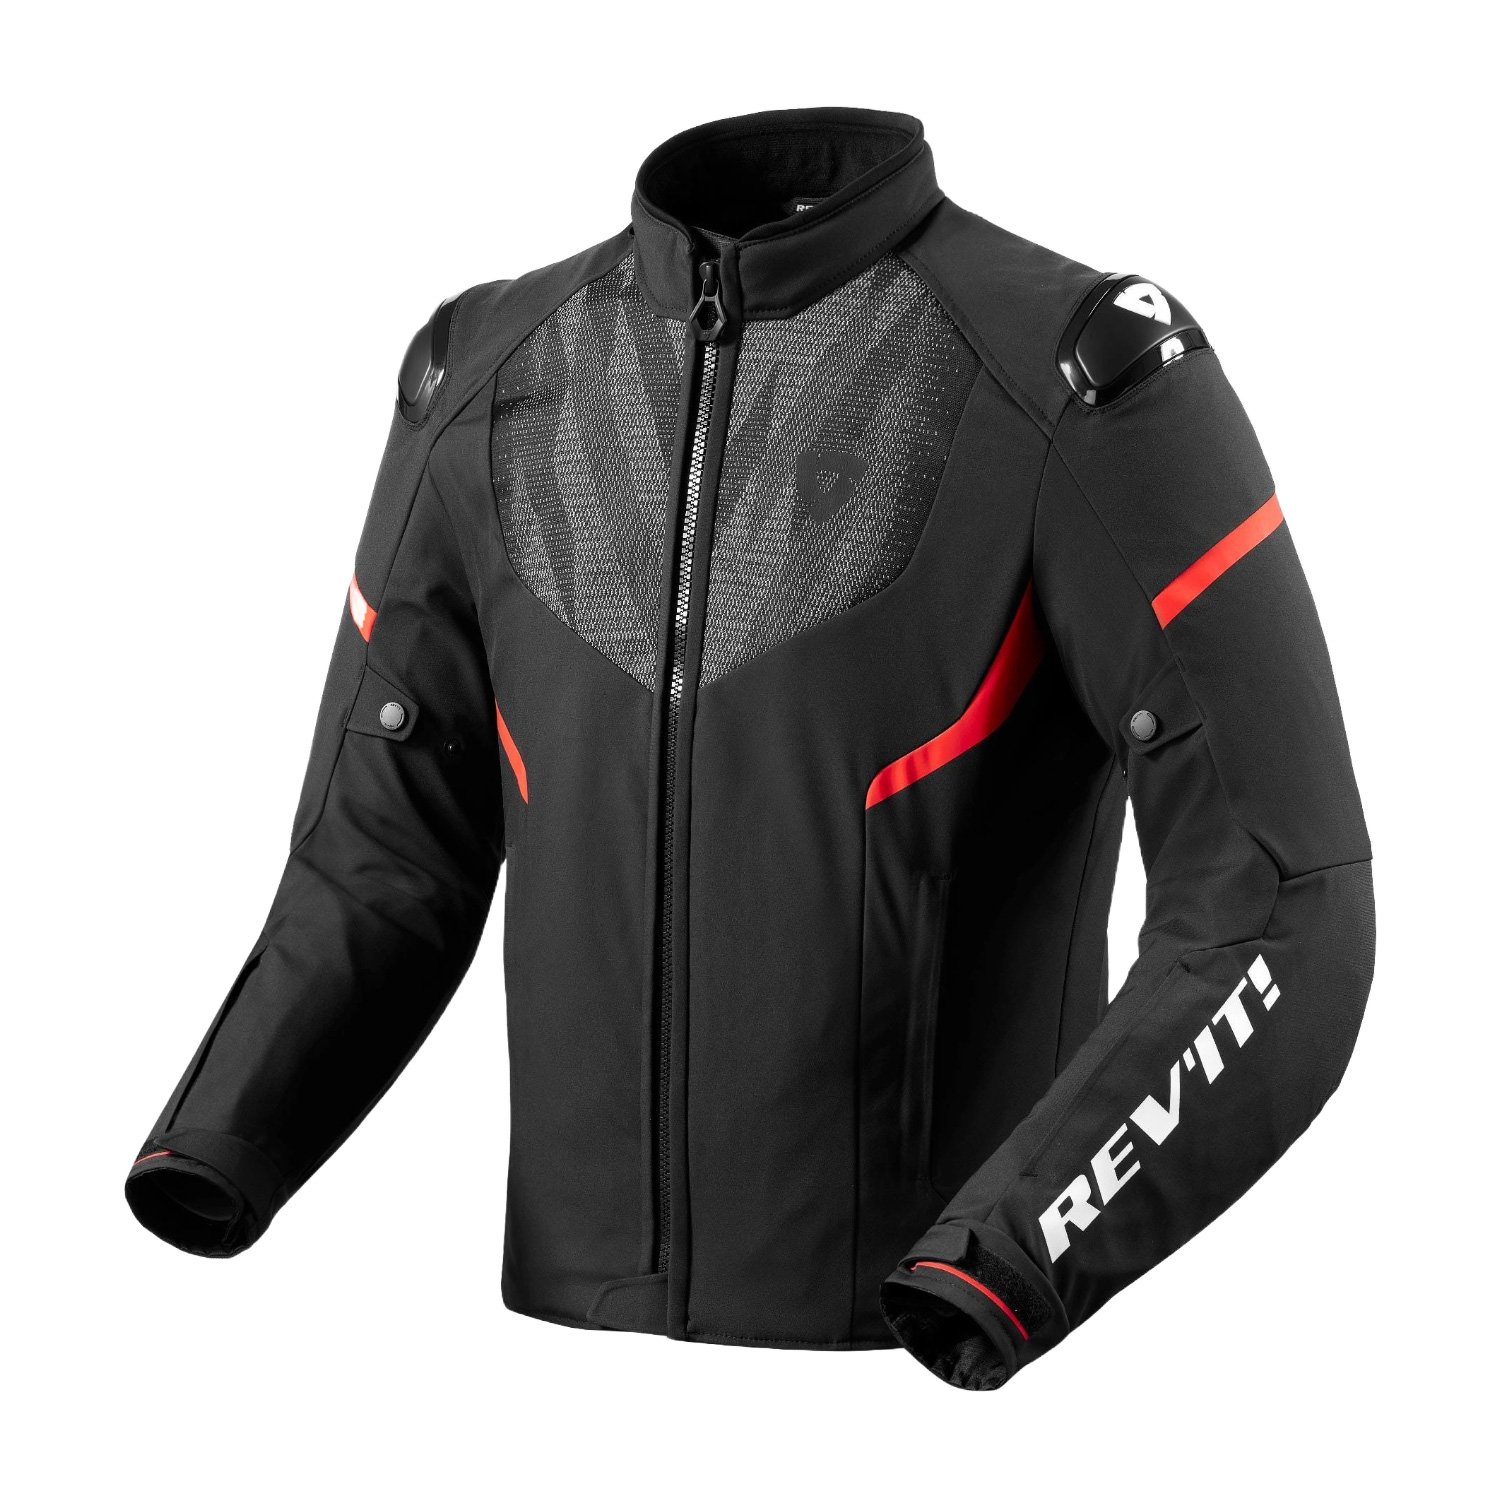 Image of REV'IT! Hyperspeed 2 H2O Jacket Black Neon Red Talla M